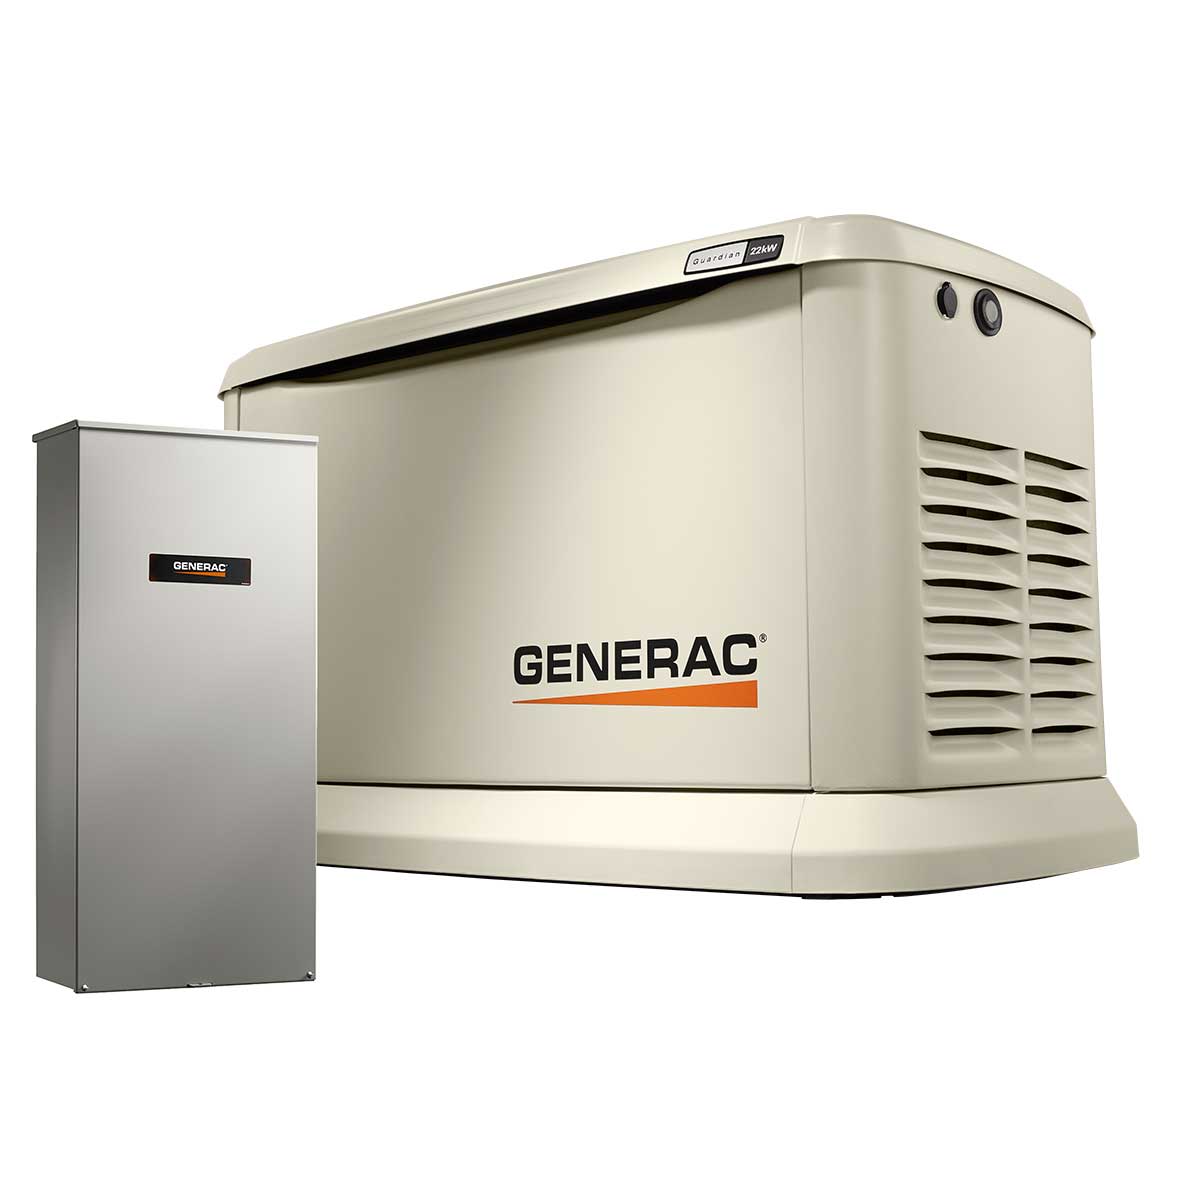 Generac 22kW Air Cooled Home Standby Generator with WiFi 200 Amp